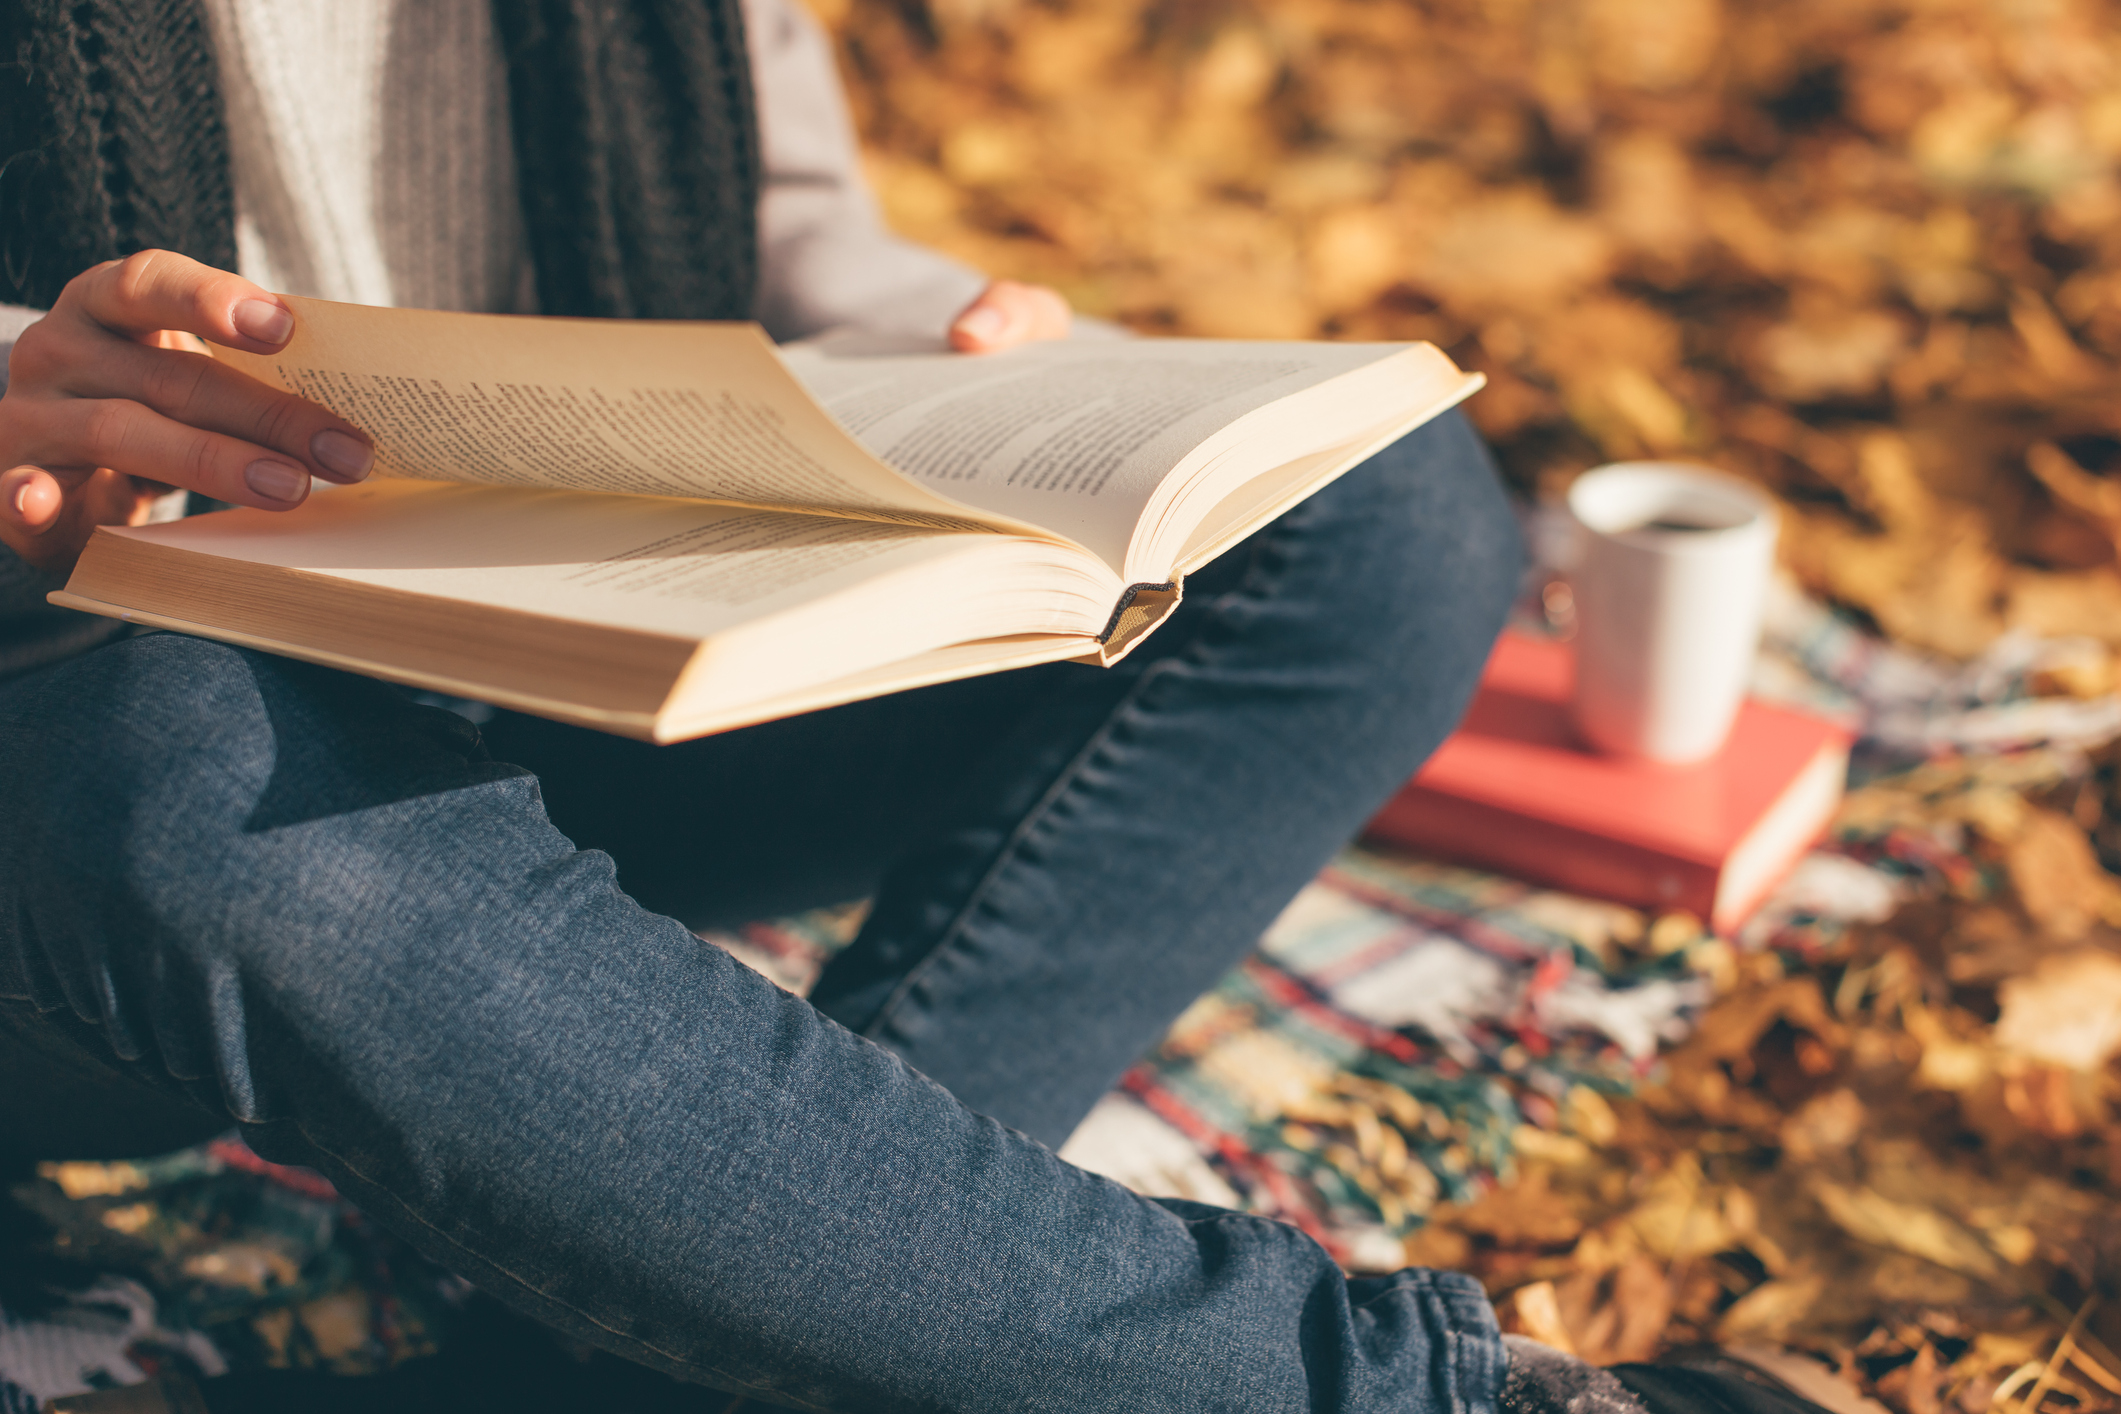 Cropped image of young woman sitting on blanket, reading book and drinking coffee or tea in autumn garden